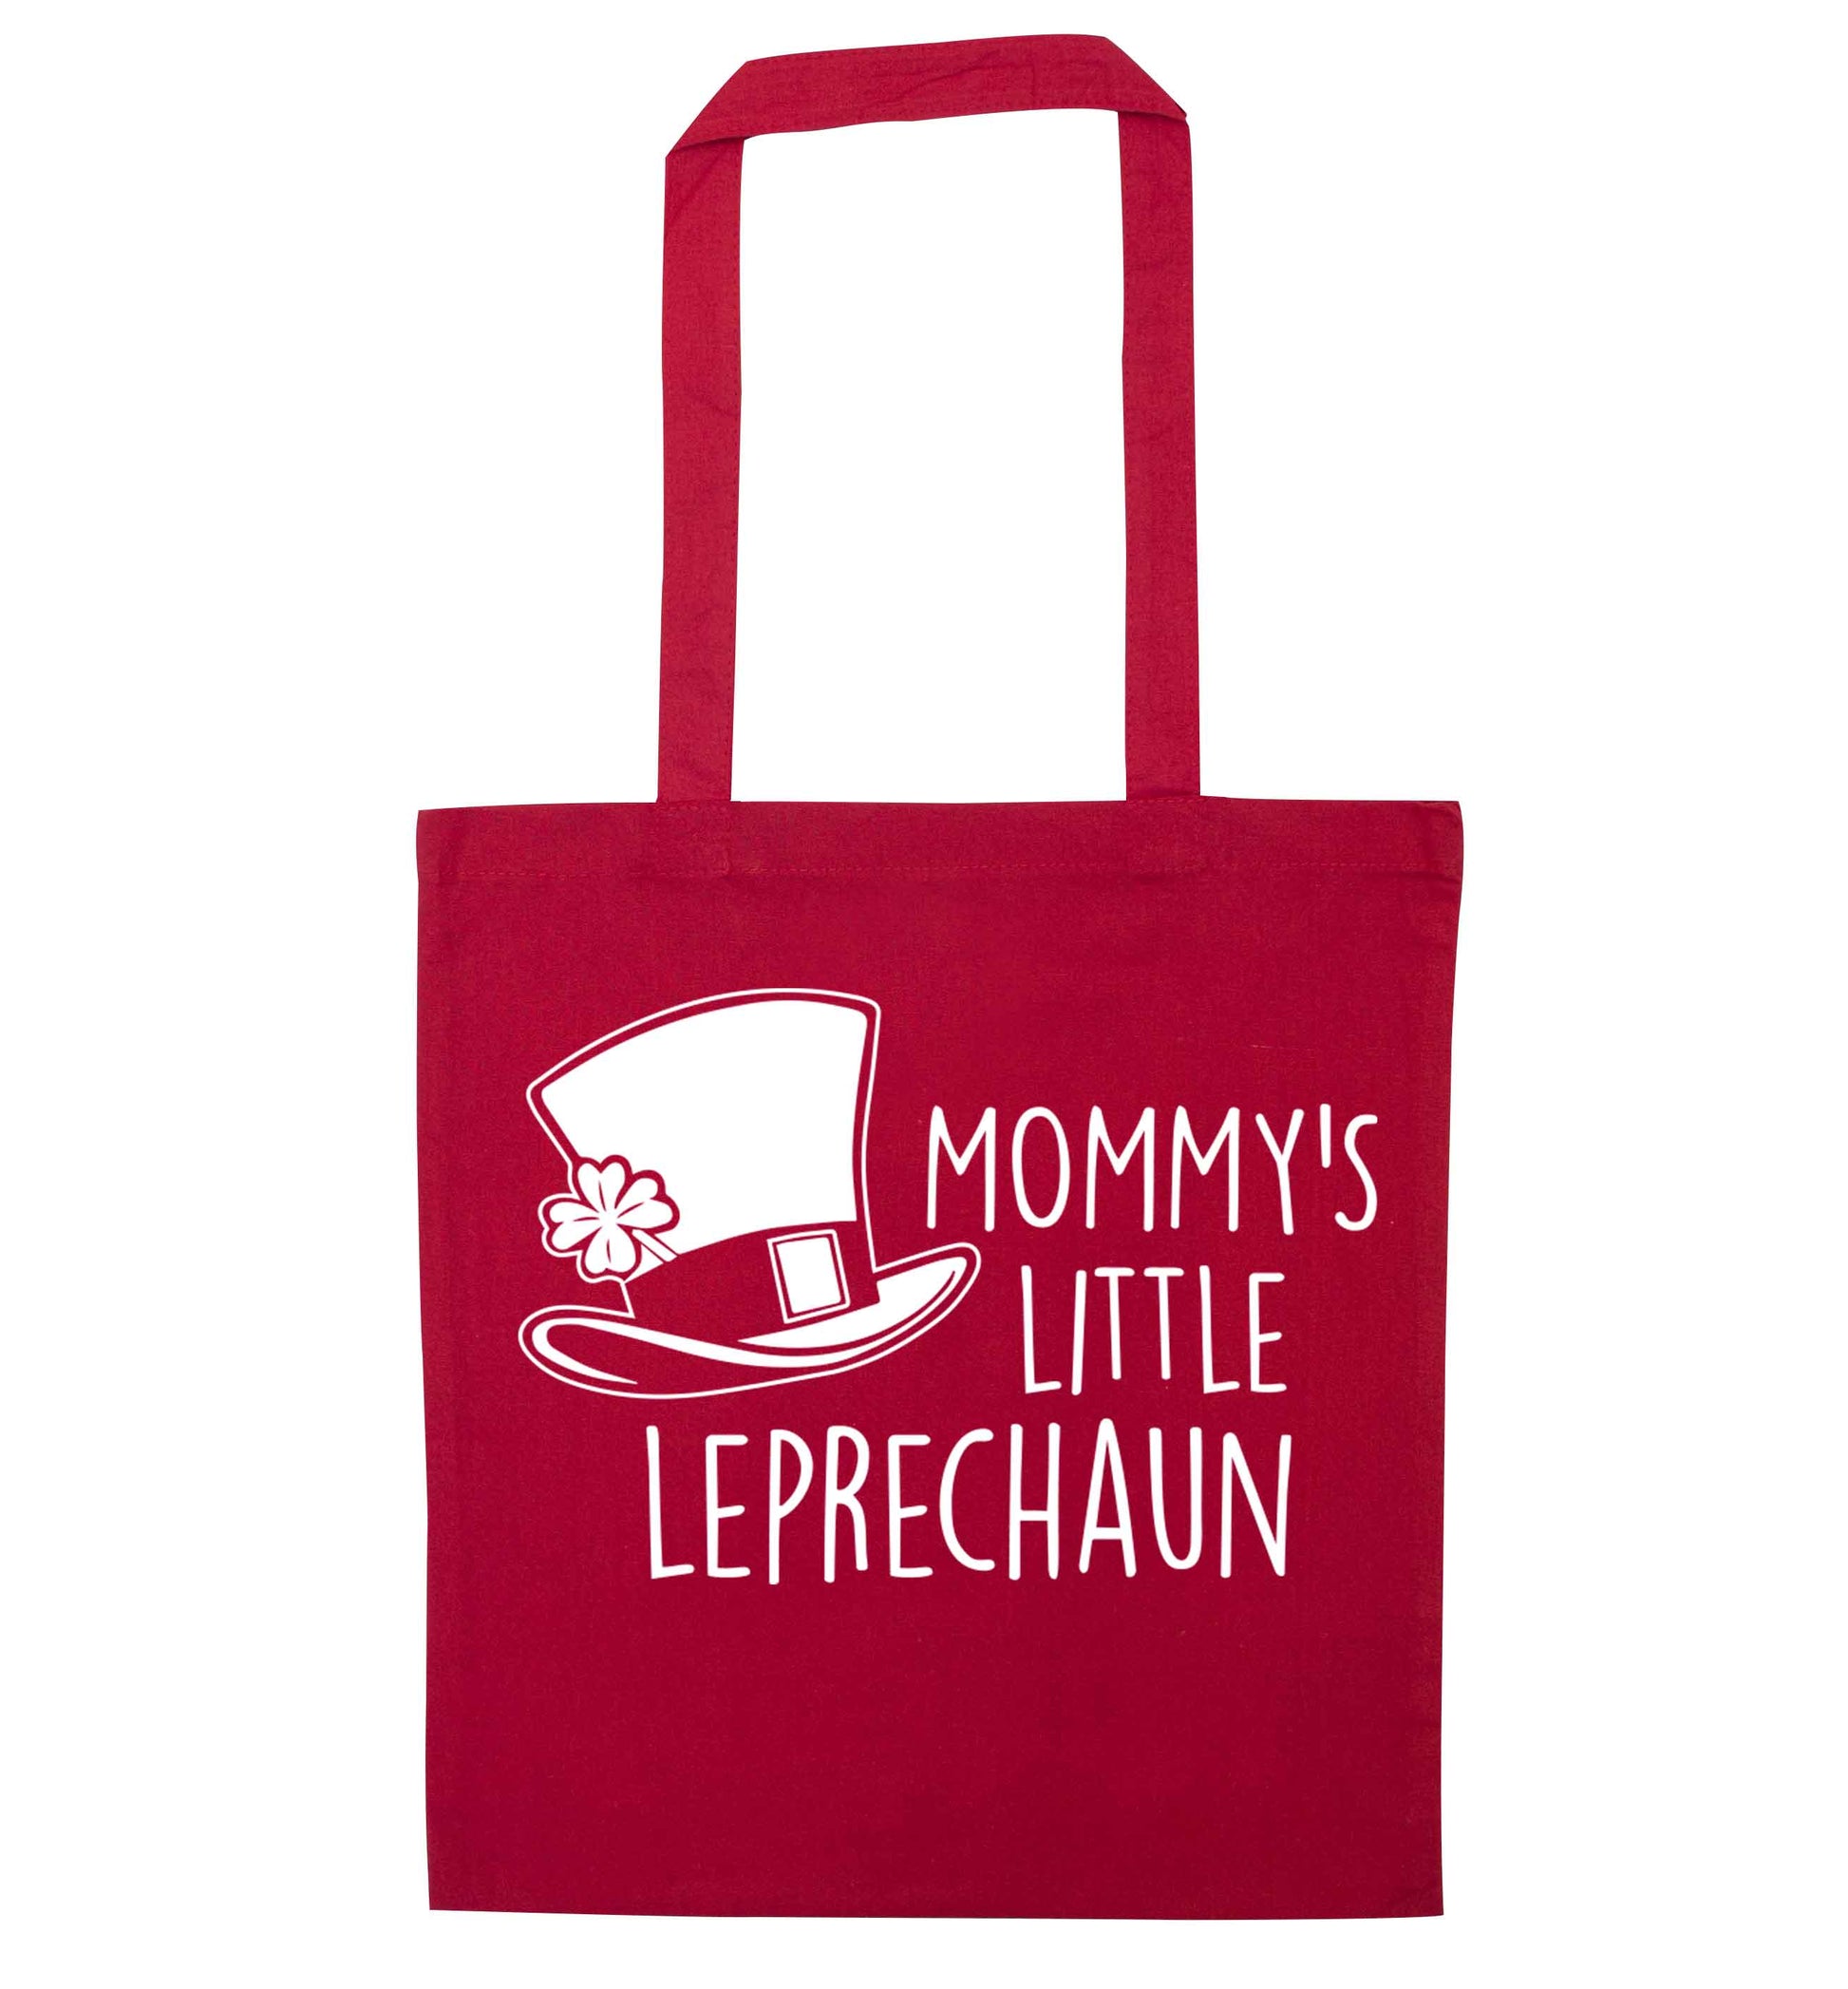 Mommy's little leprechaun red tote bag